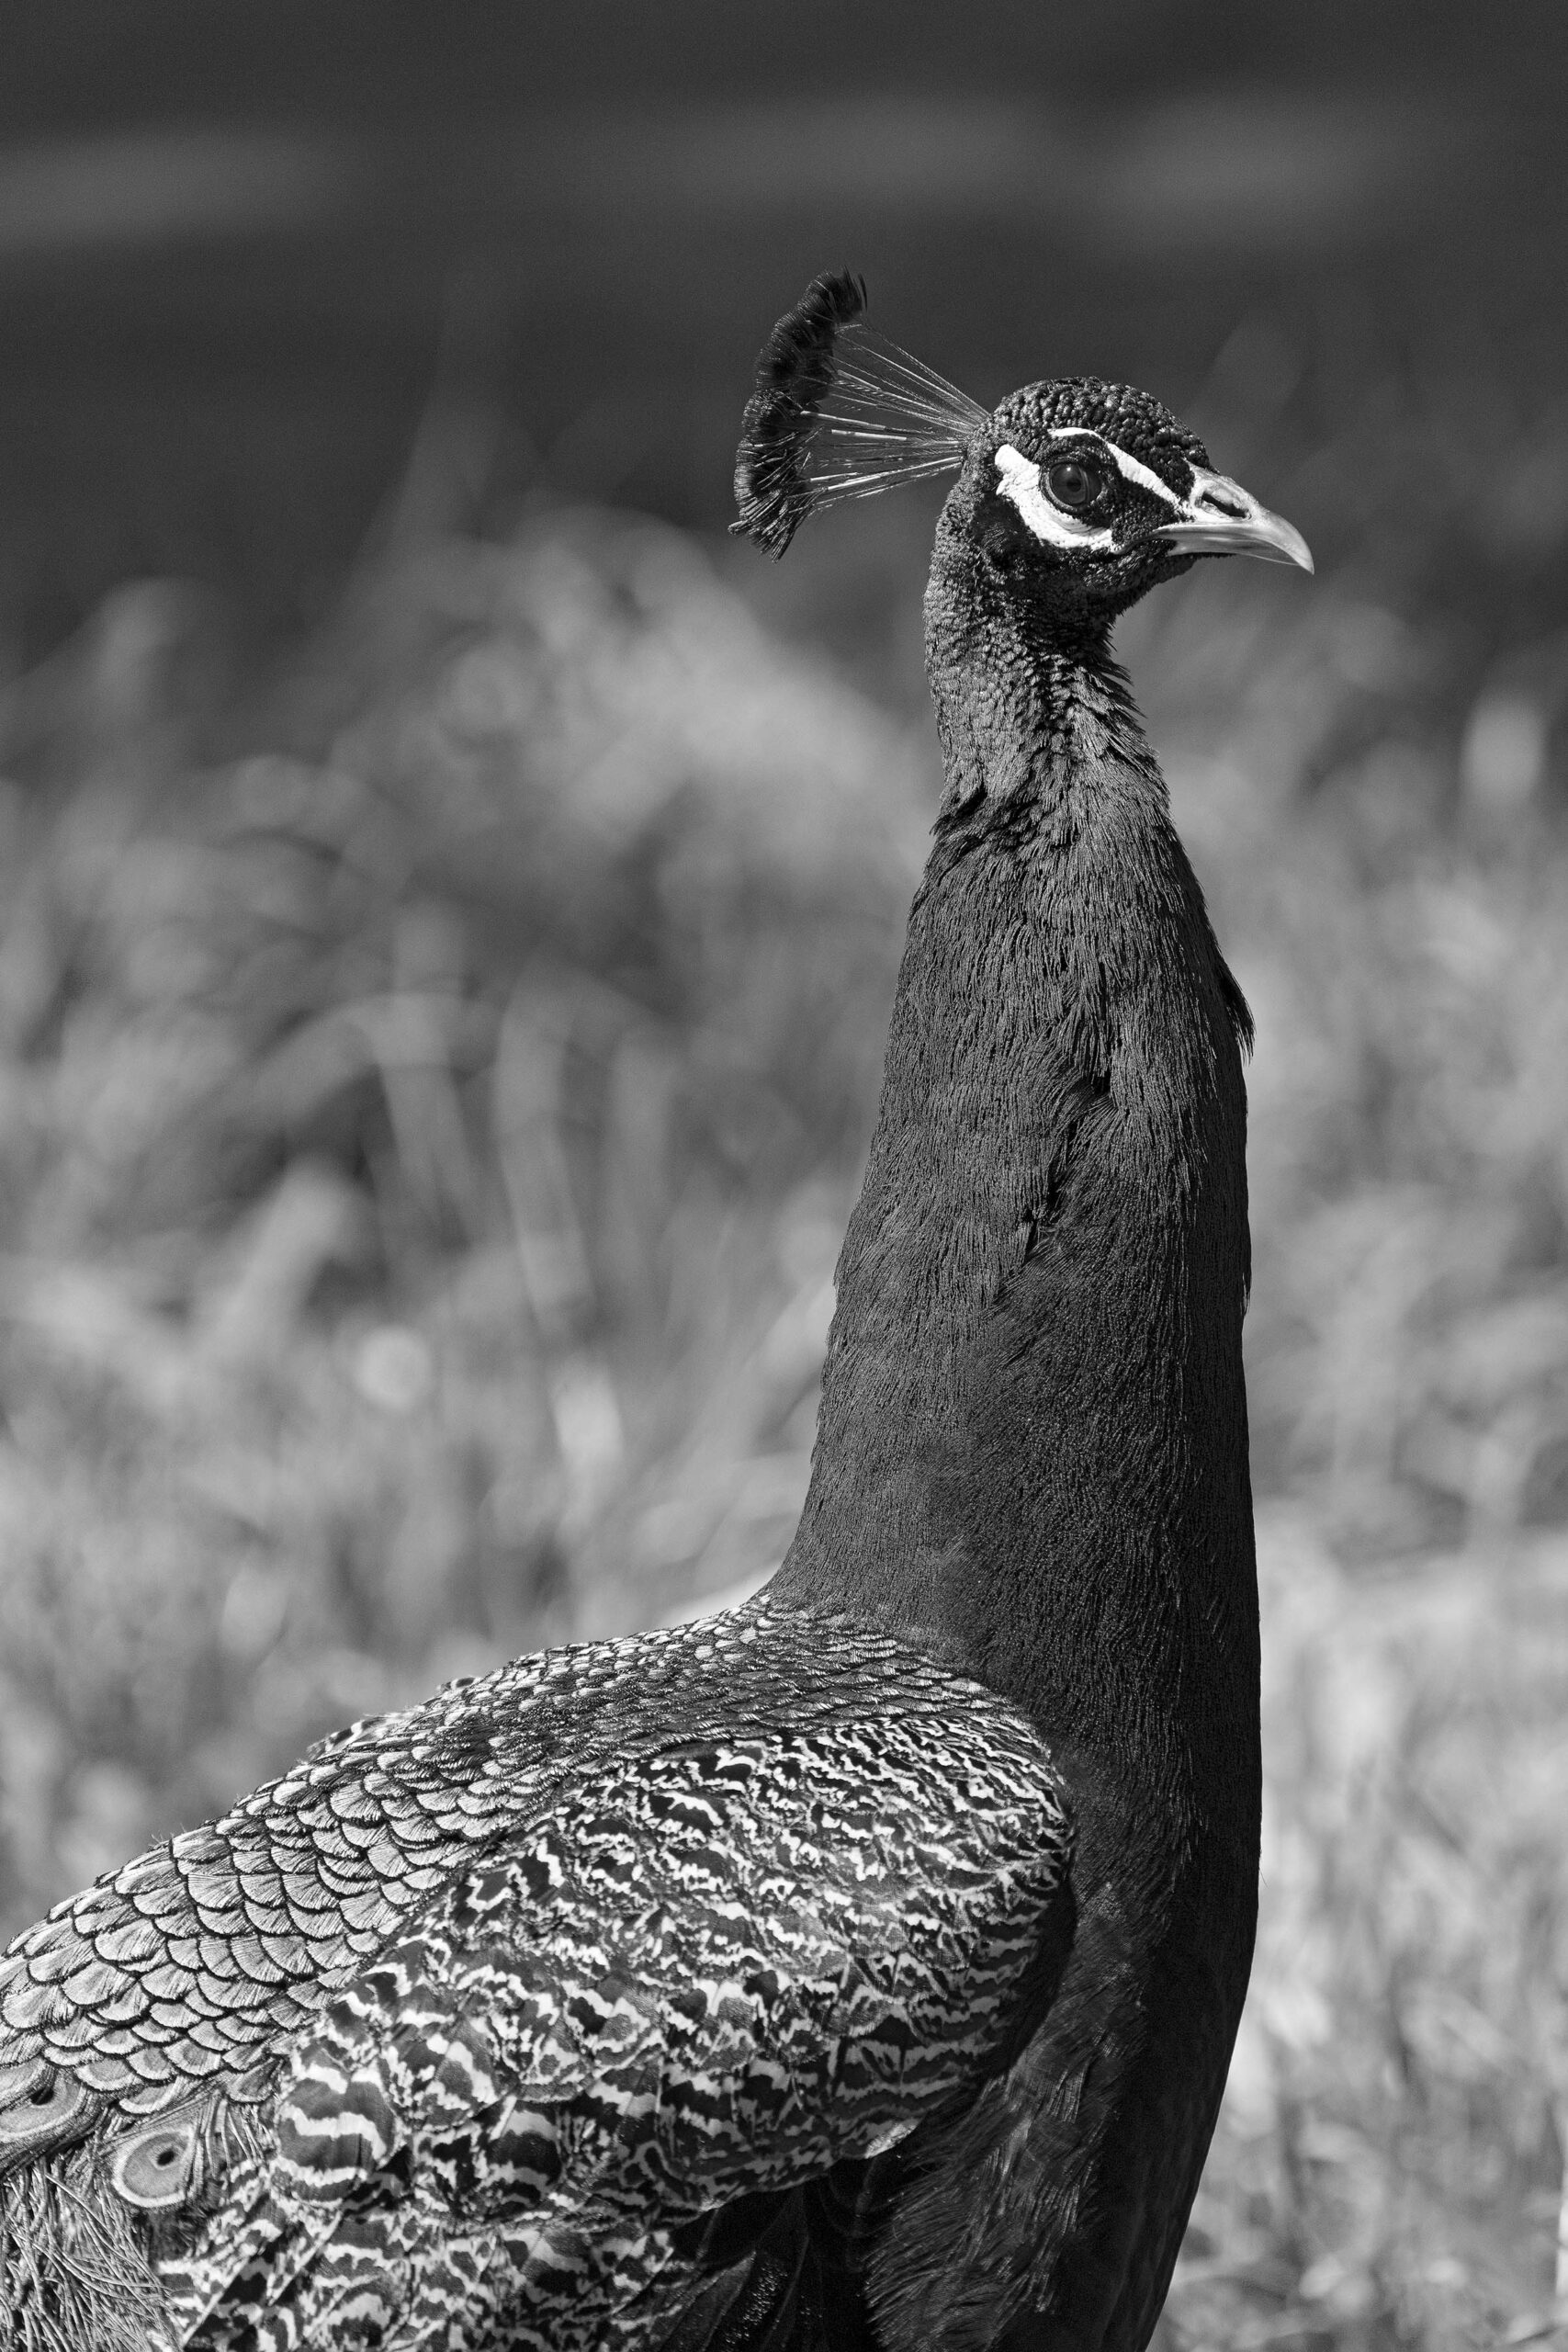 A peacock at Allen Park in Salt Lake City in black and white.